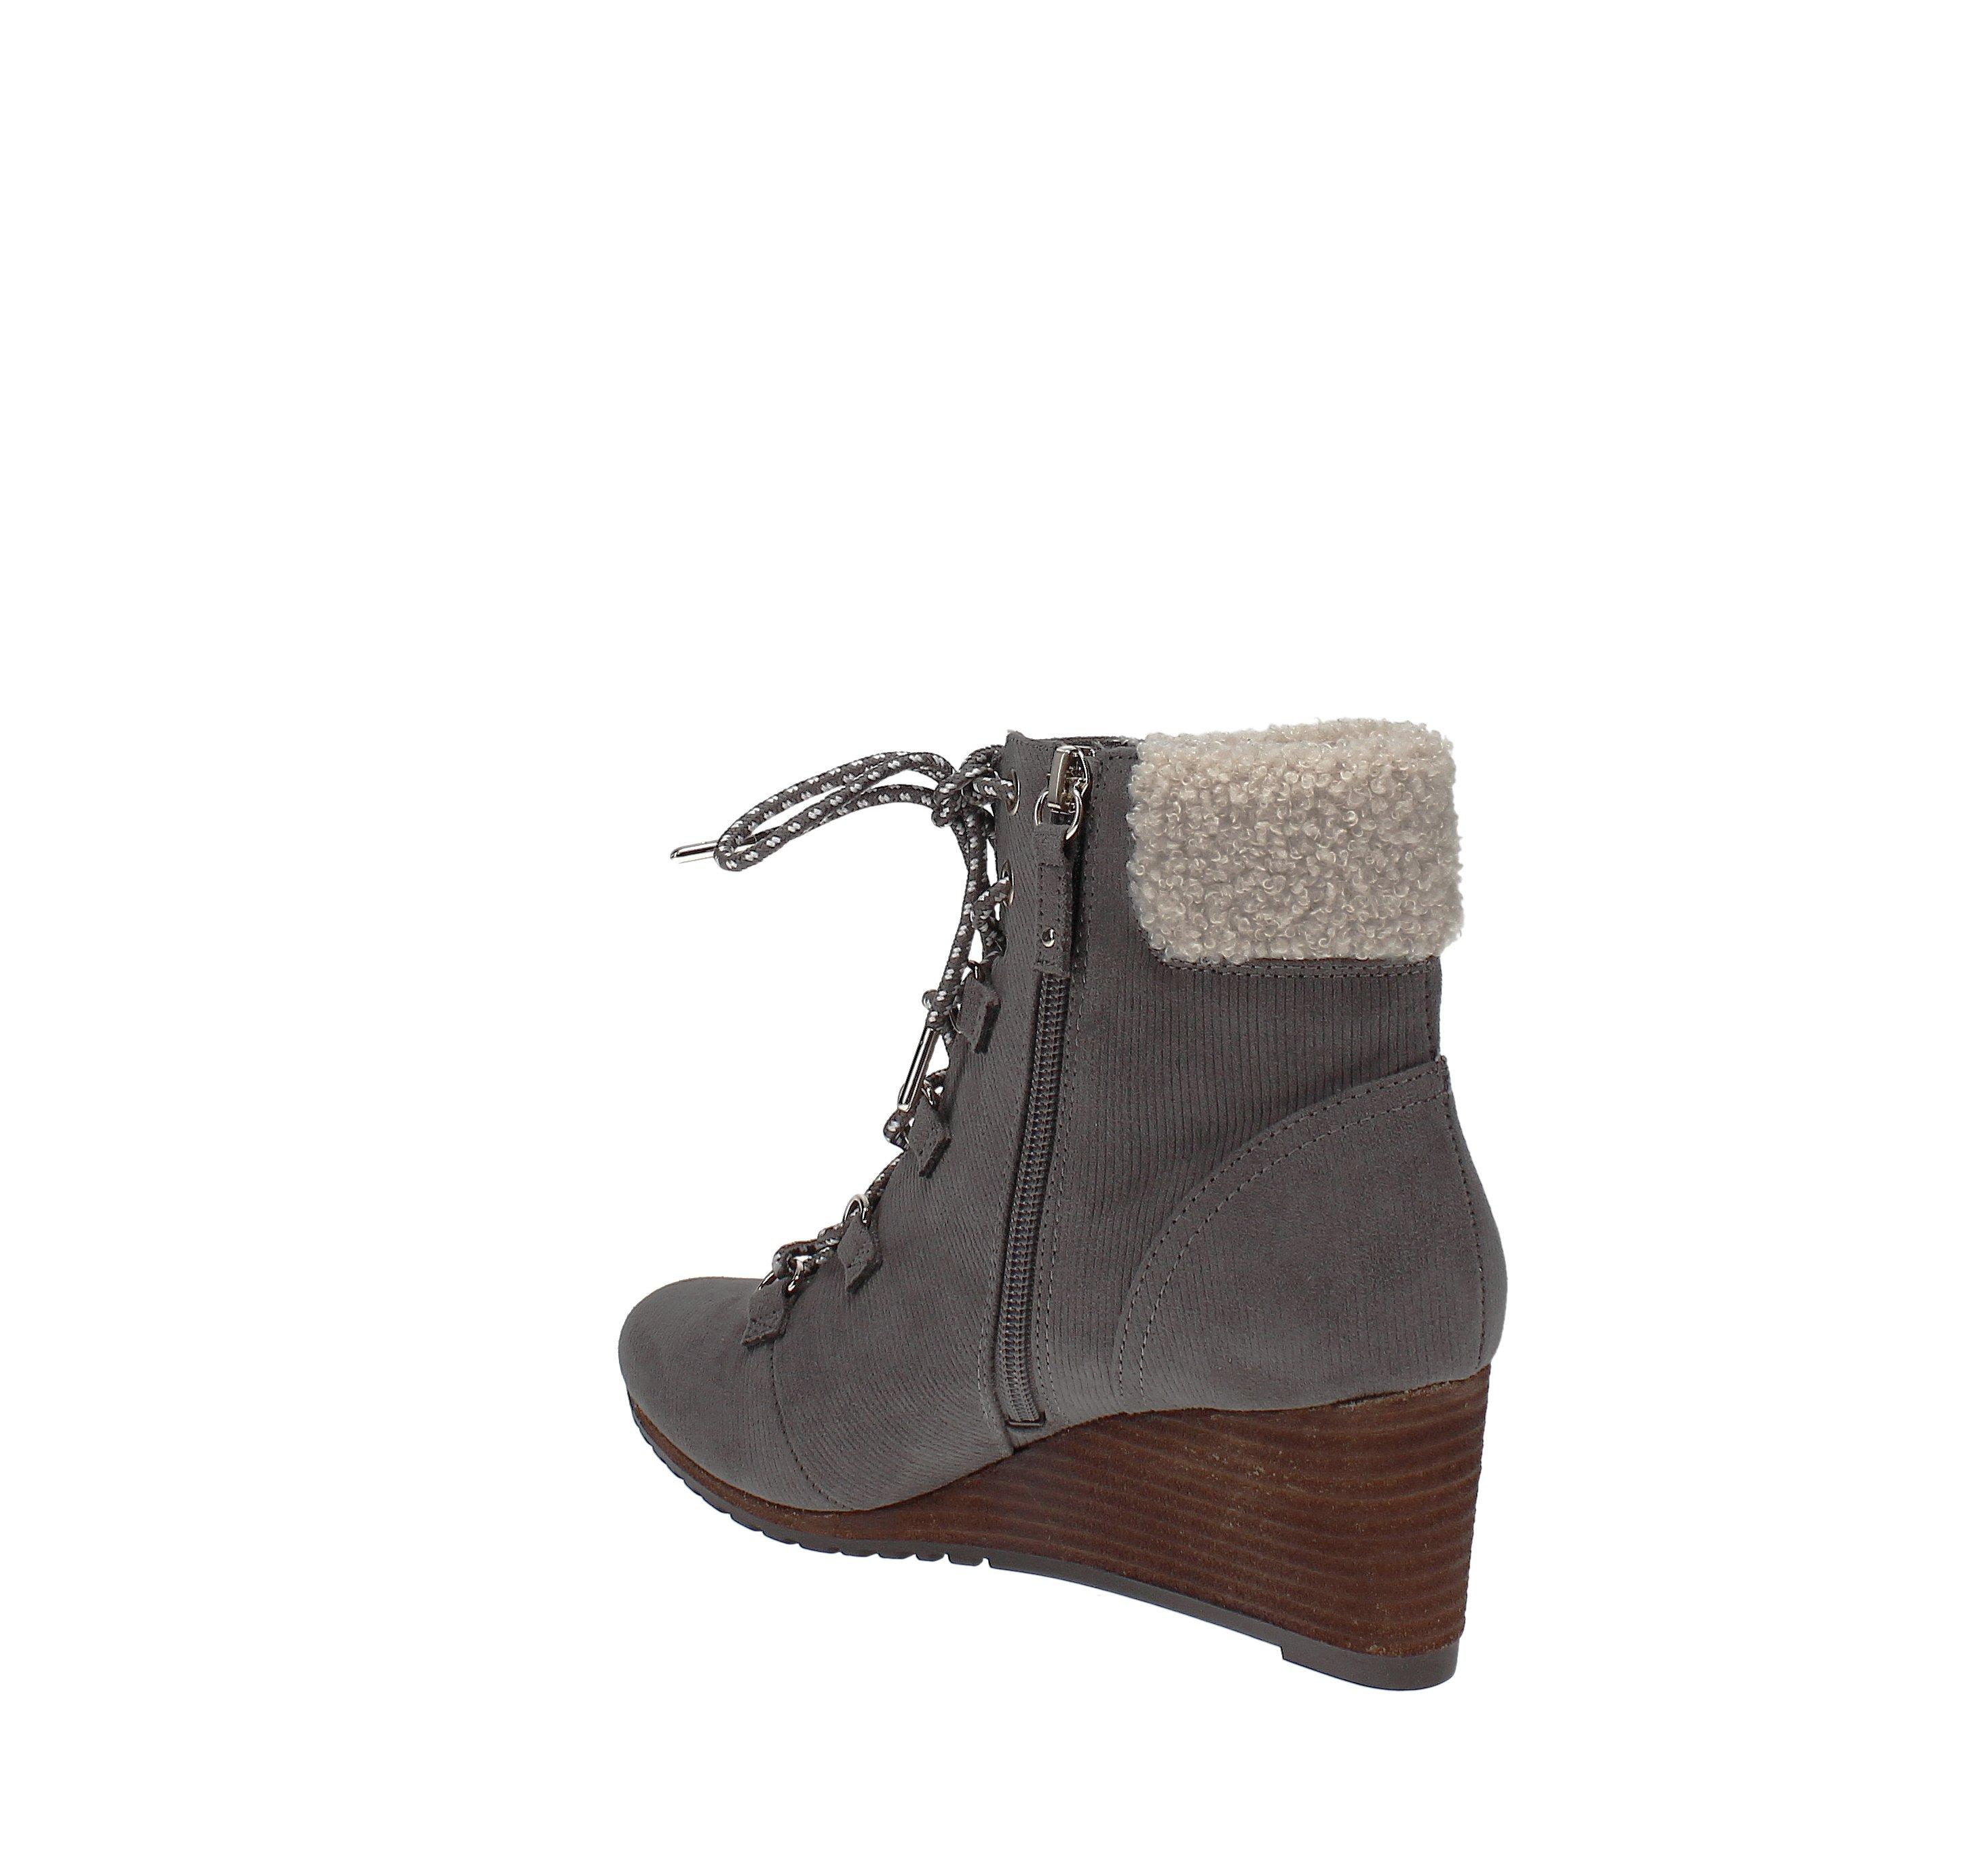 Scholls Shoes Womens Charmer Bootie Ankle Boot Dr